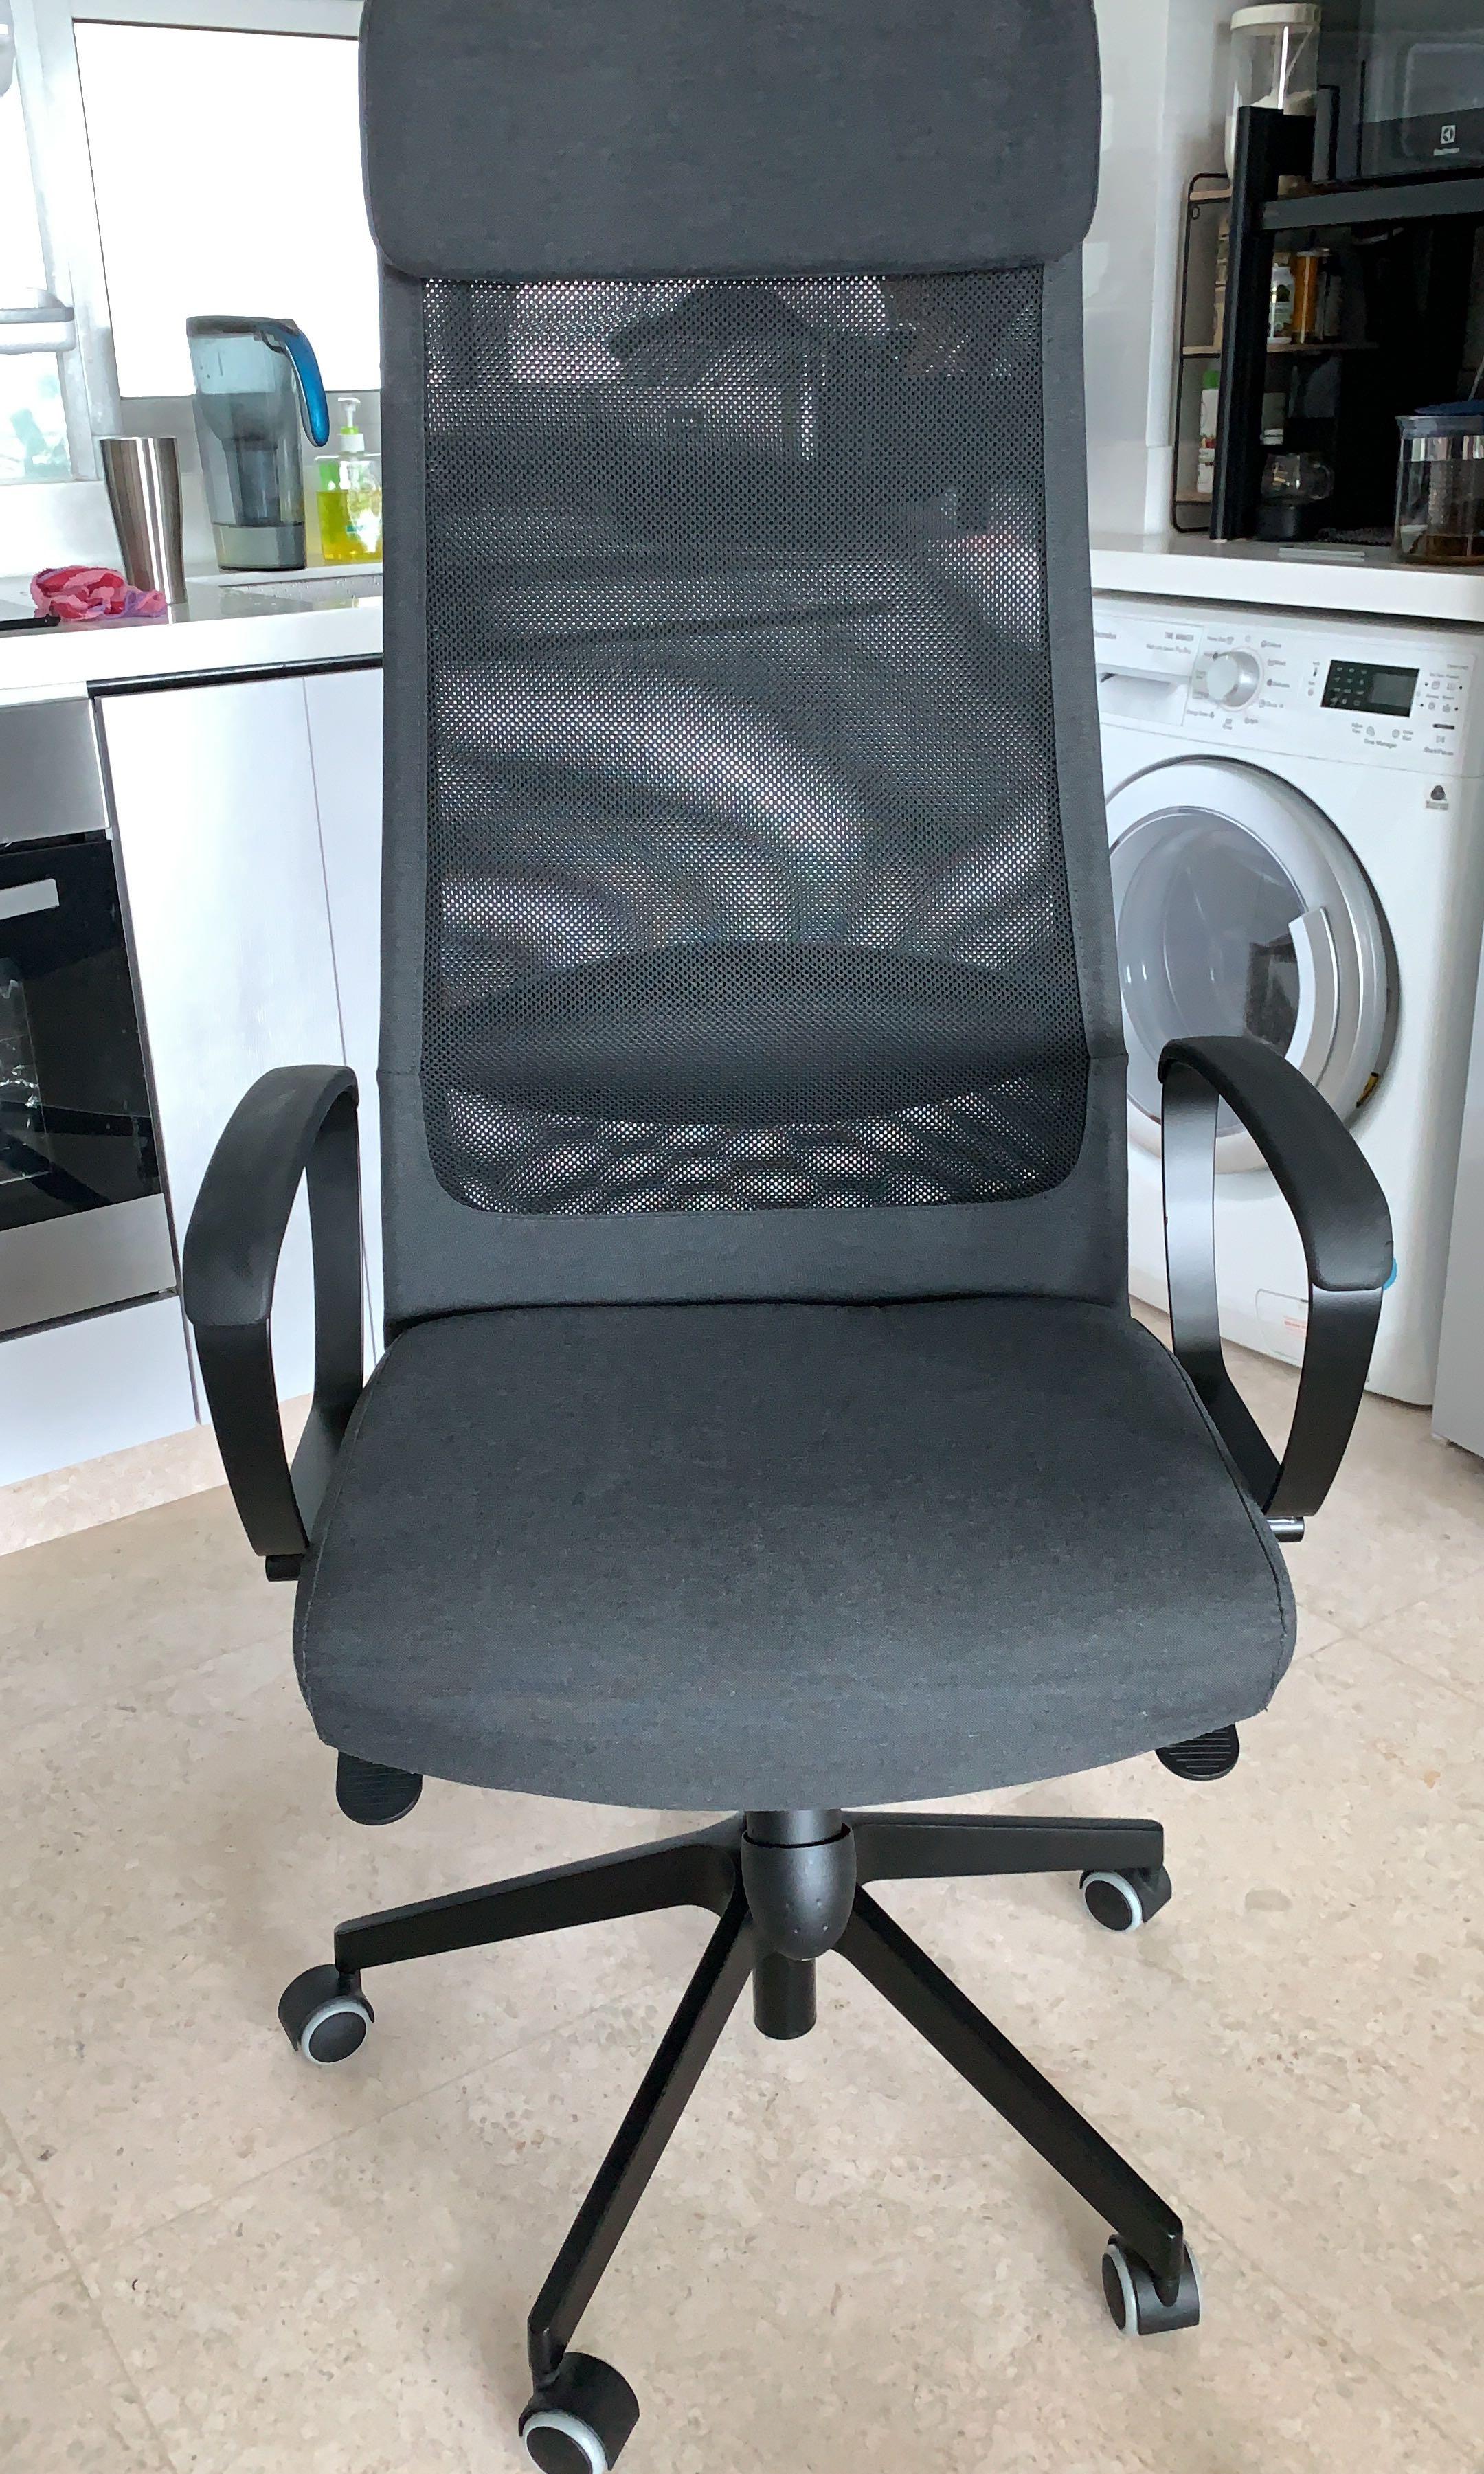 ikea markus chair almost new office chair